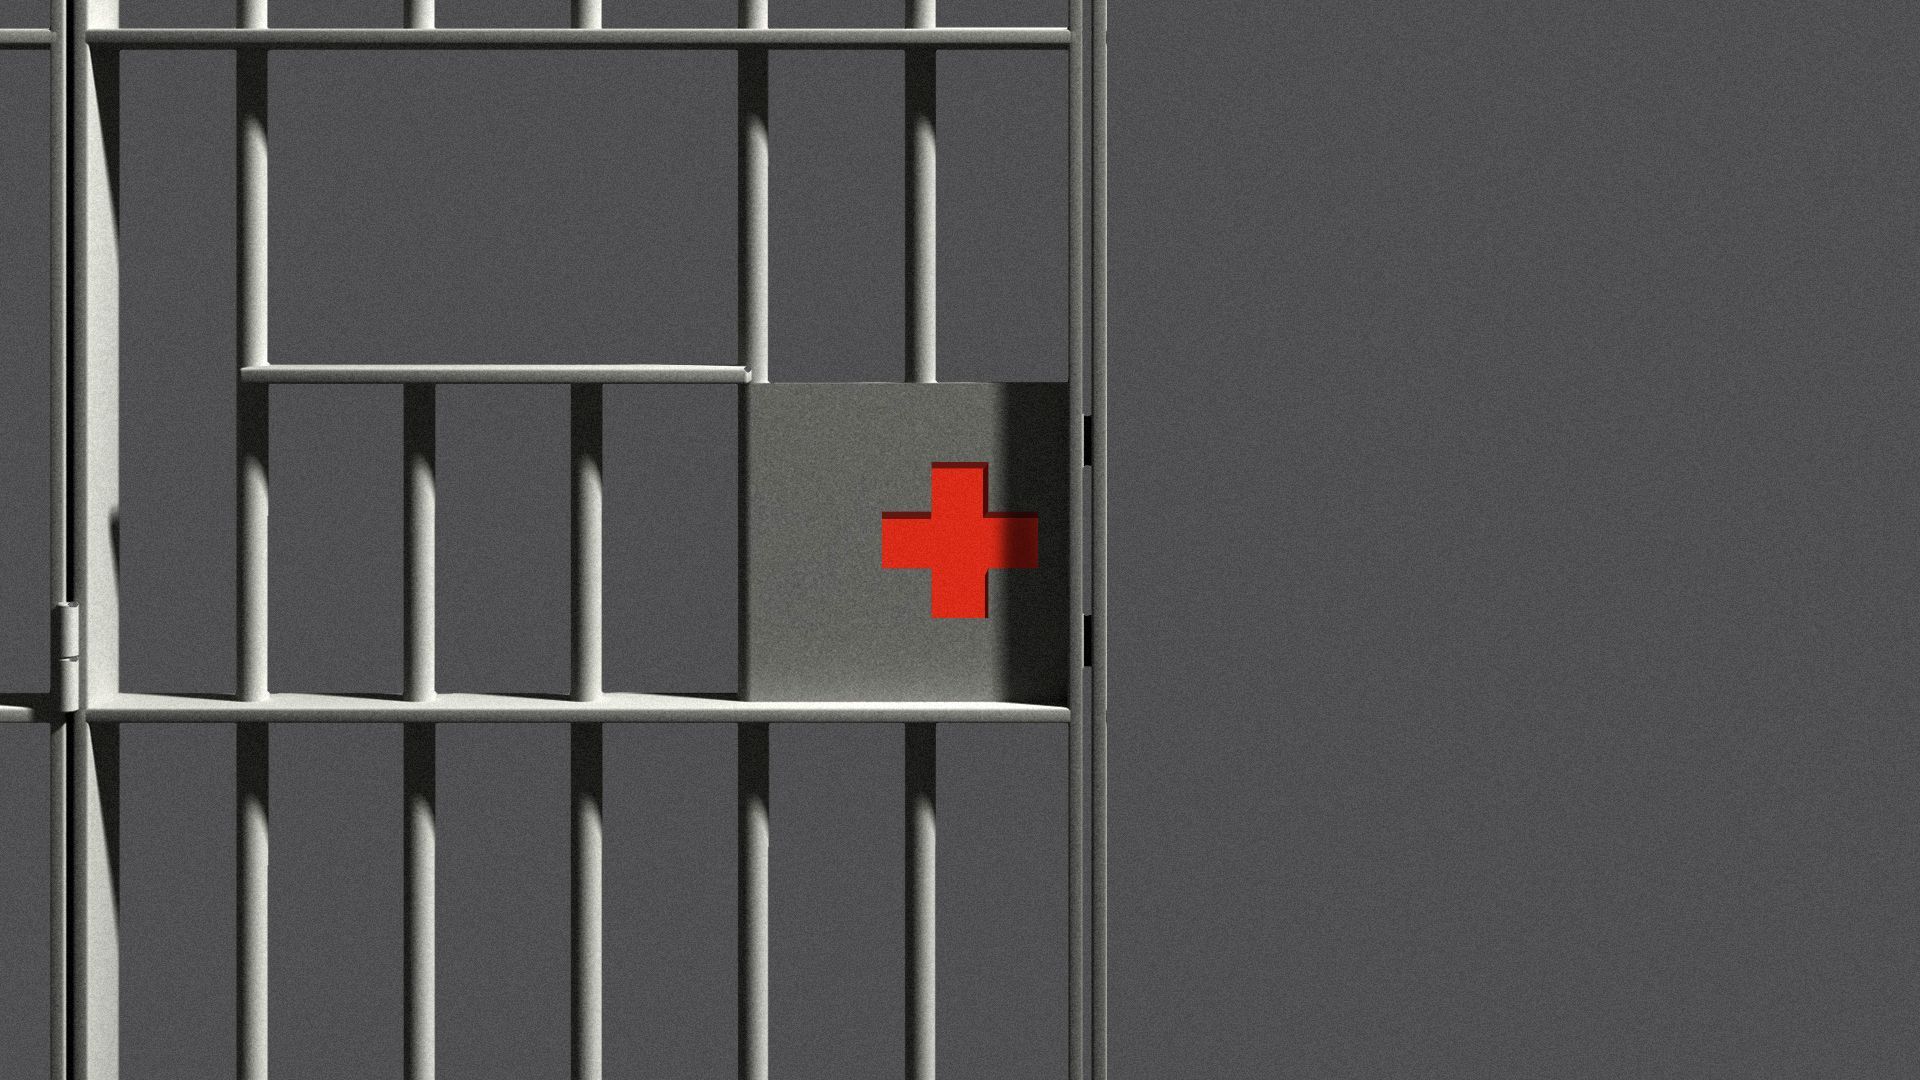 Illustration of a red cross-shaped keyhole on a jail cell door.